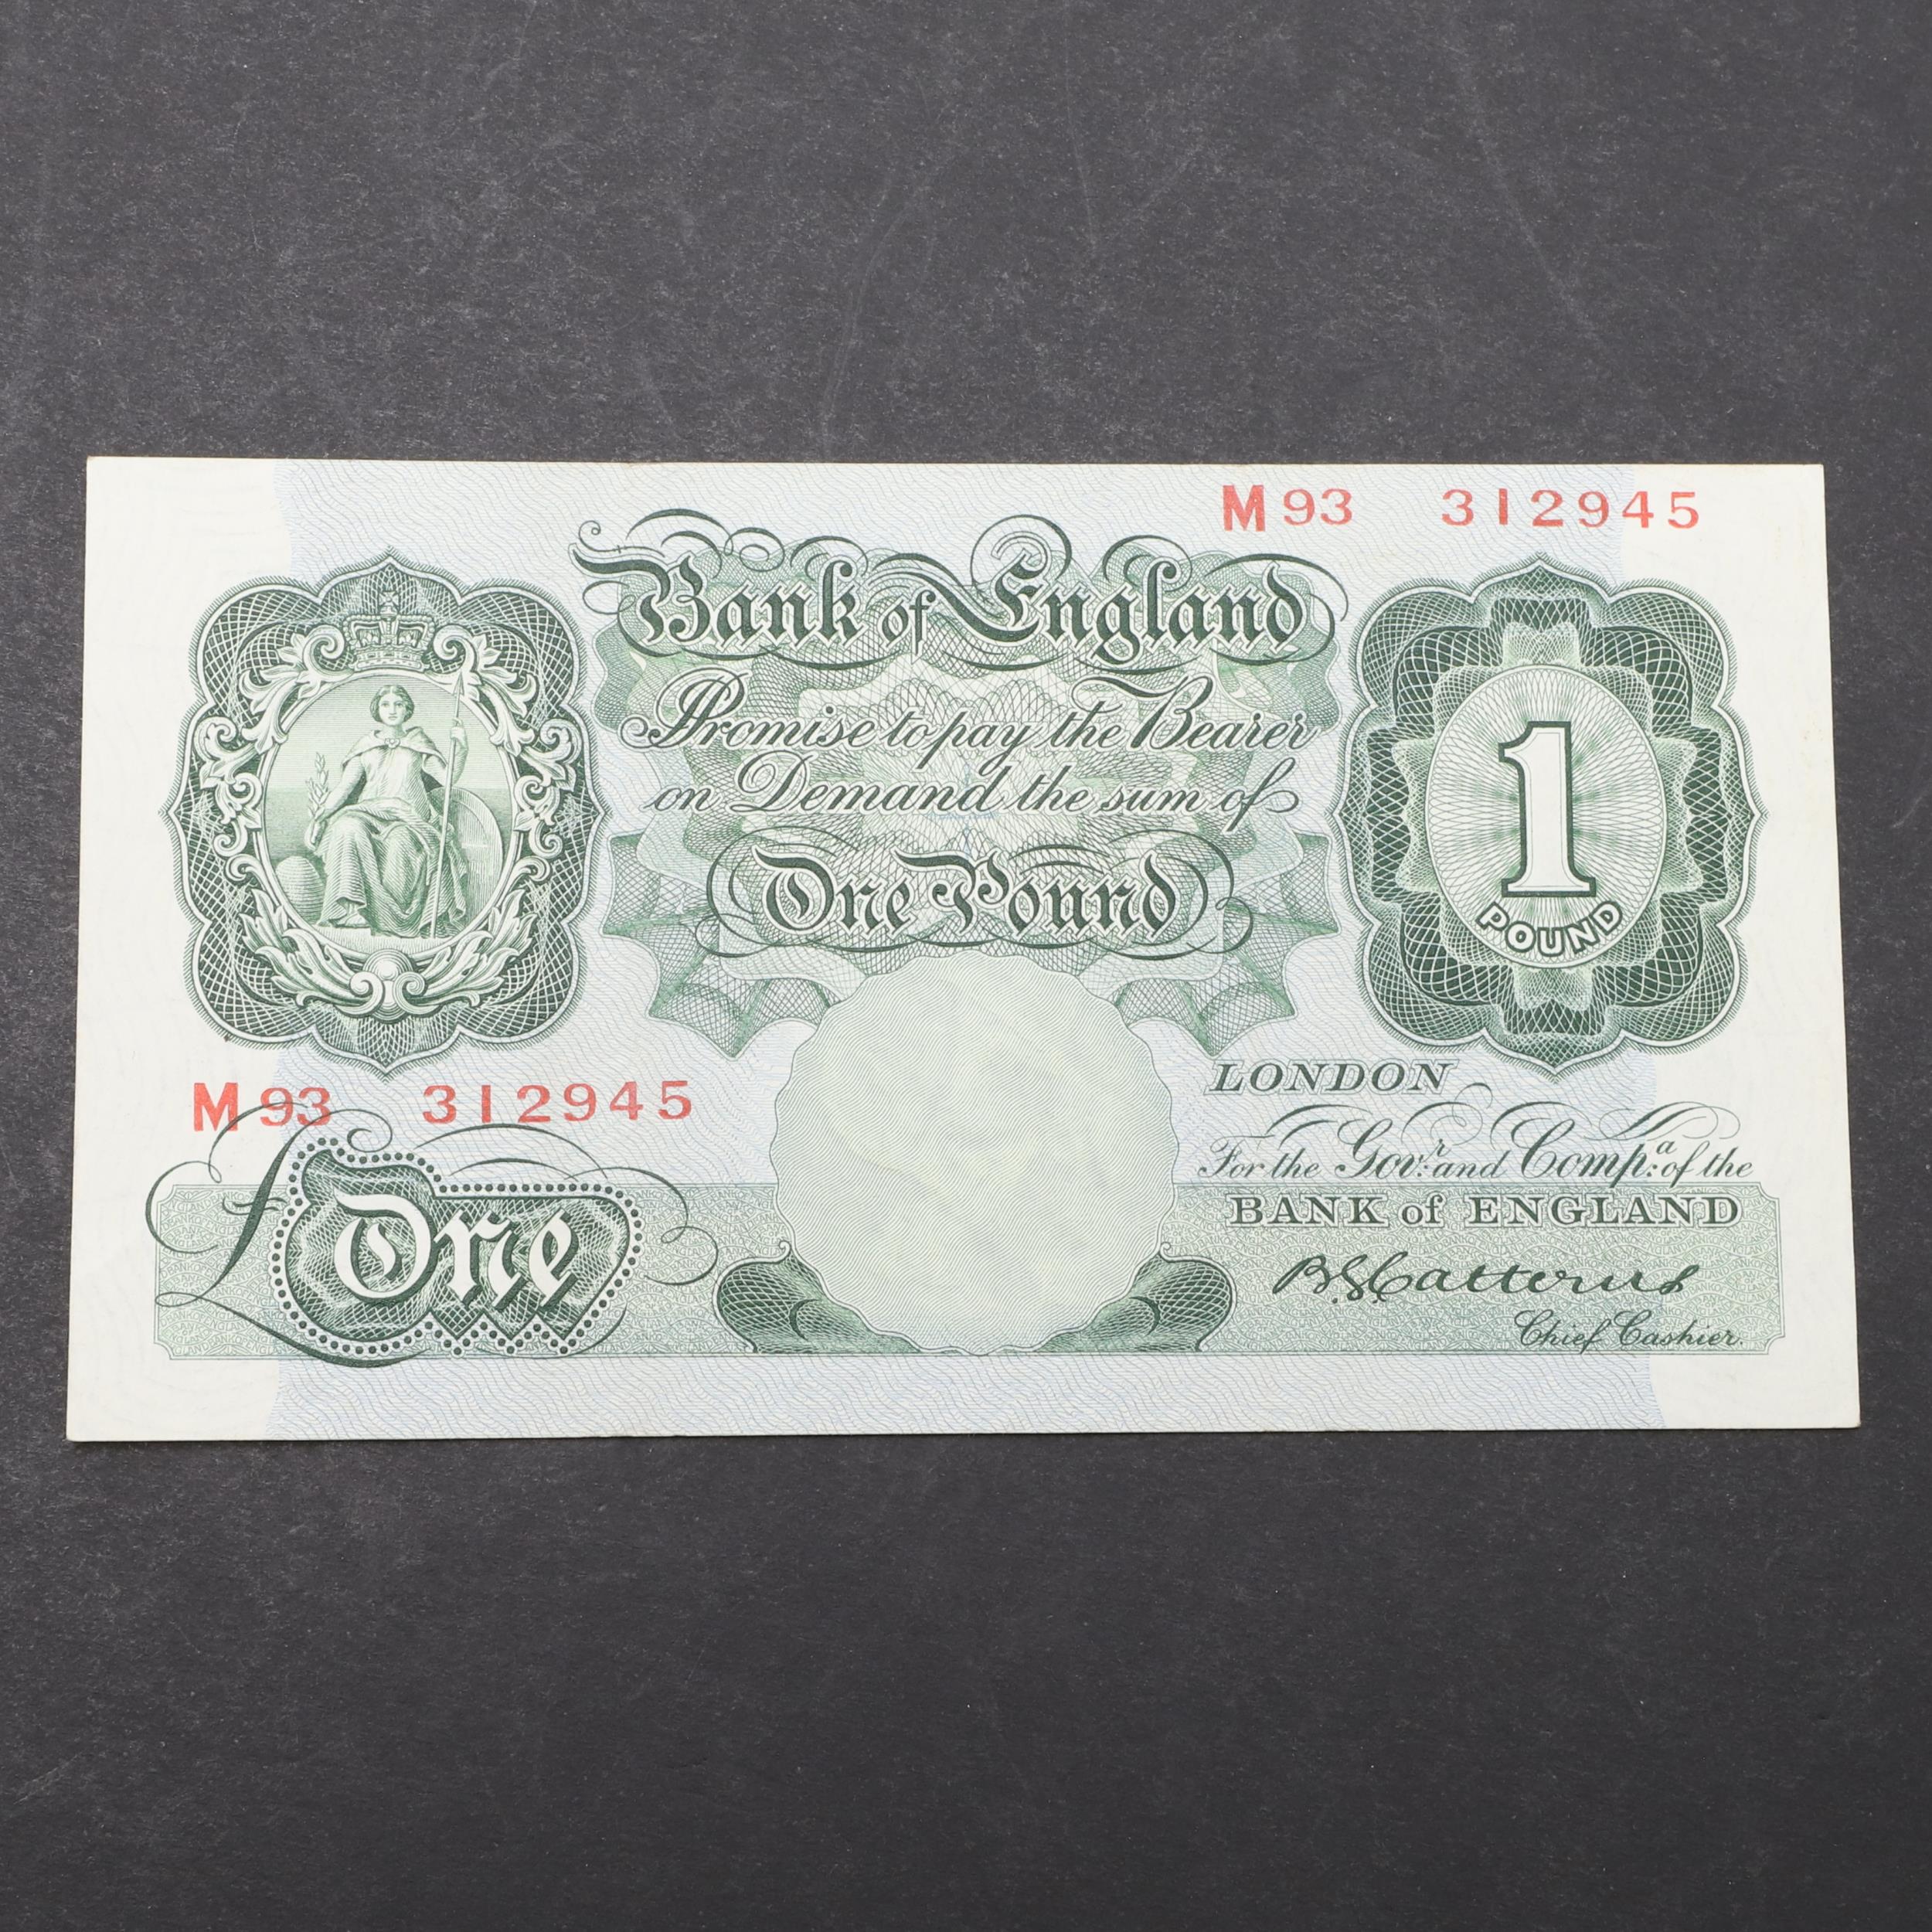 A BANK OF ENGLAND SERIES 'A' ONE POUND NOTE.